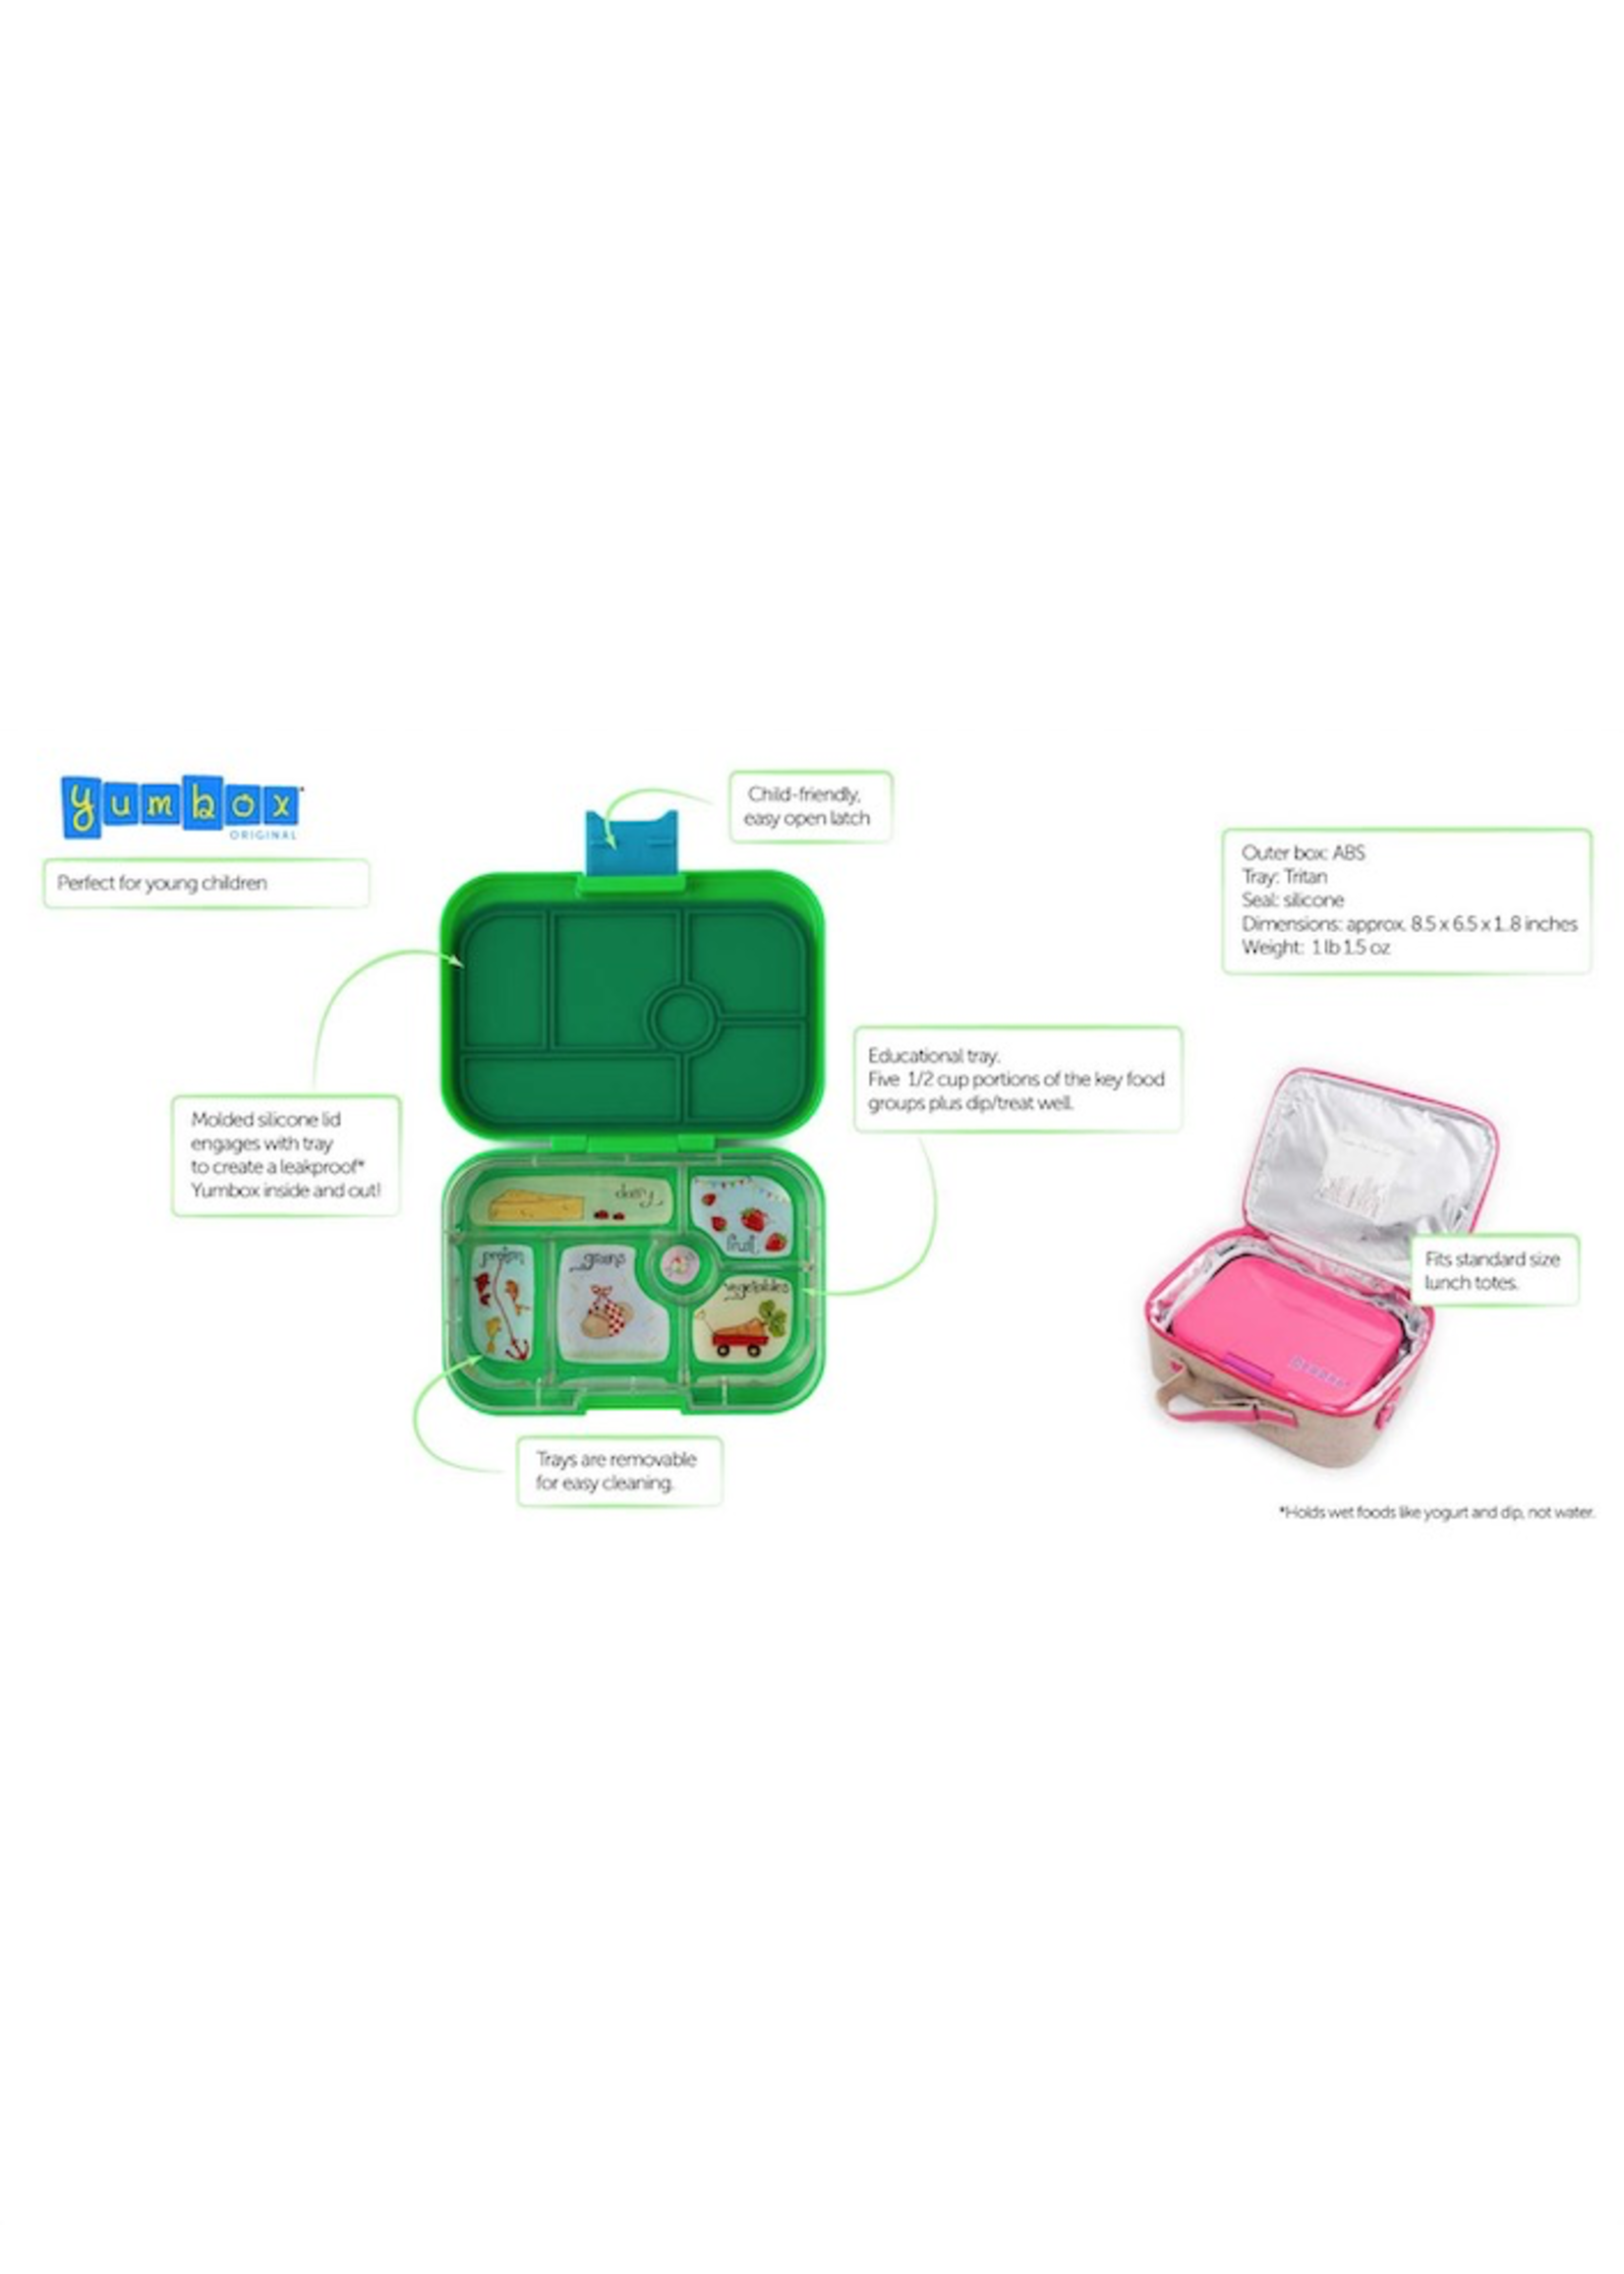 Yumbox Yumbox, Leakproof 6 CompartmentBento Box for Kids